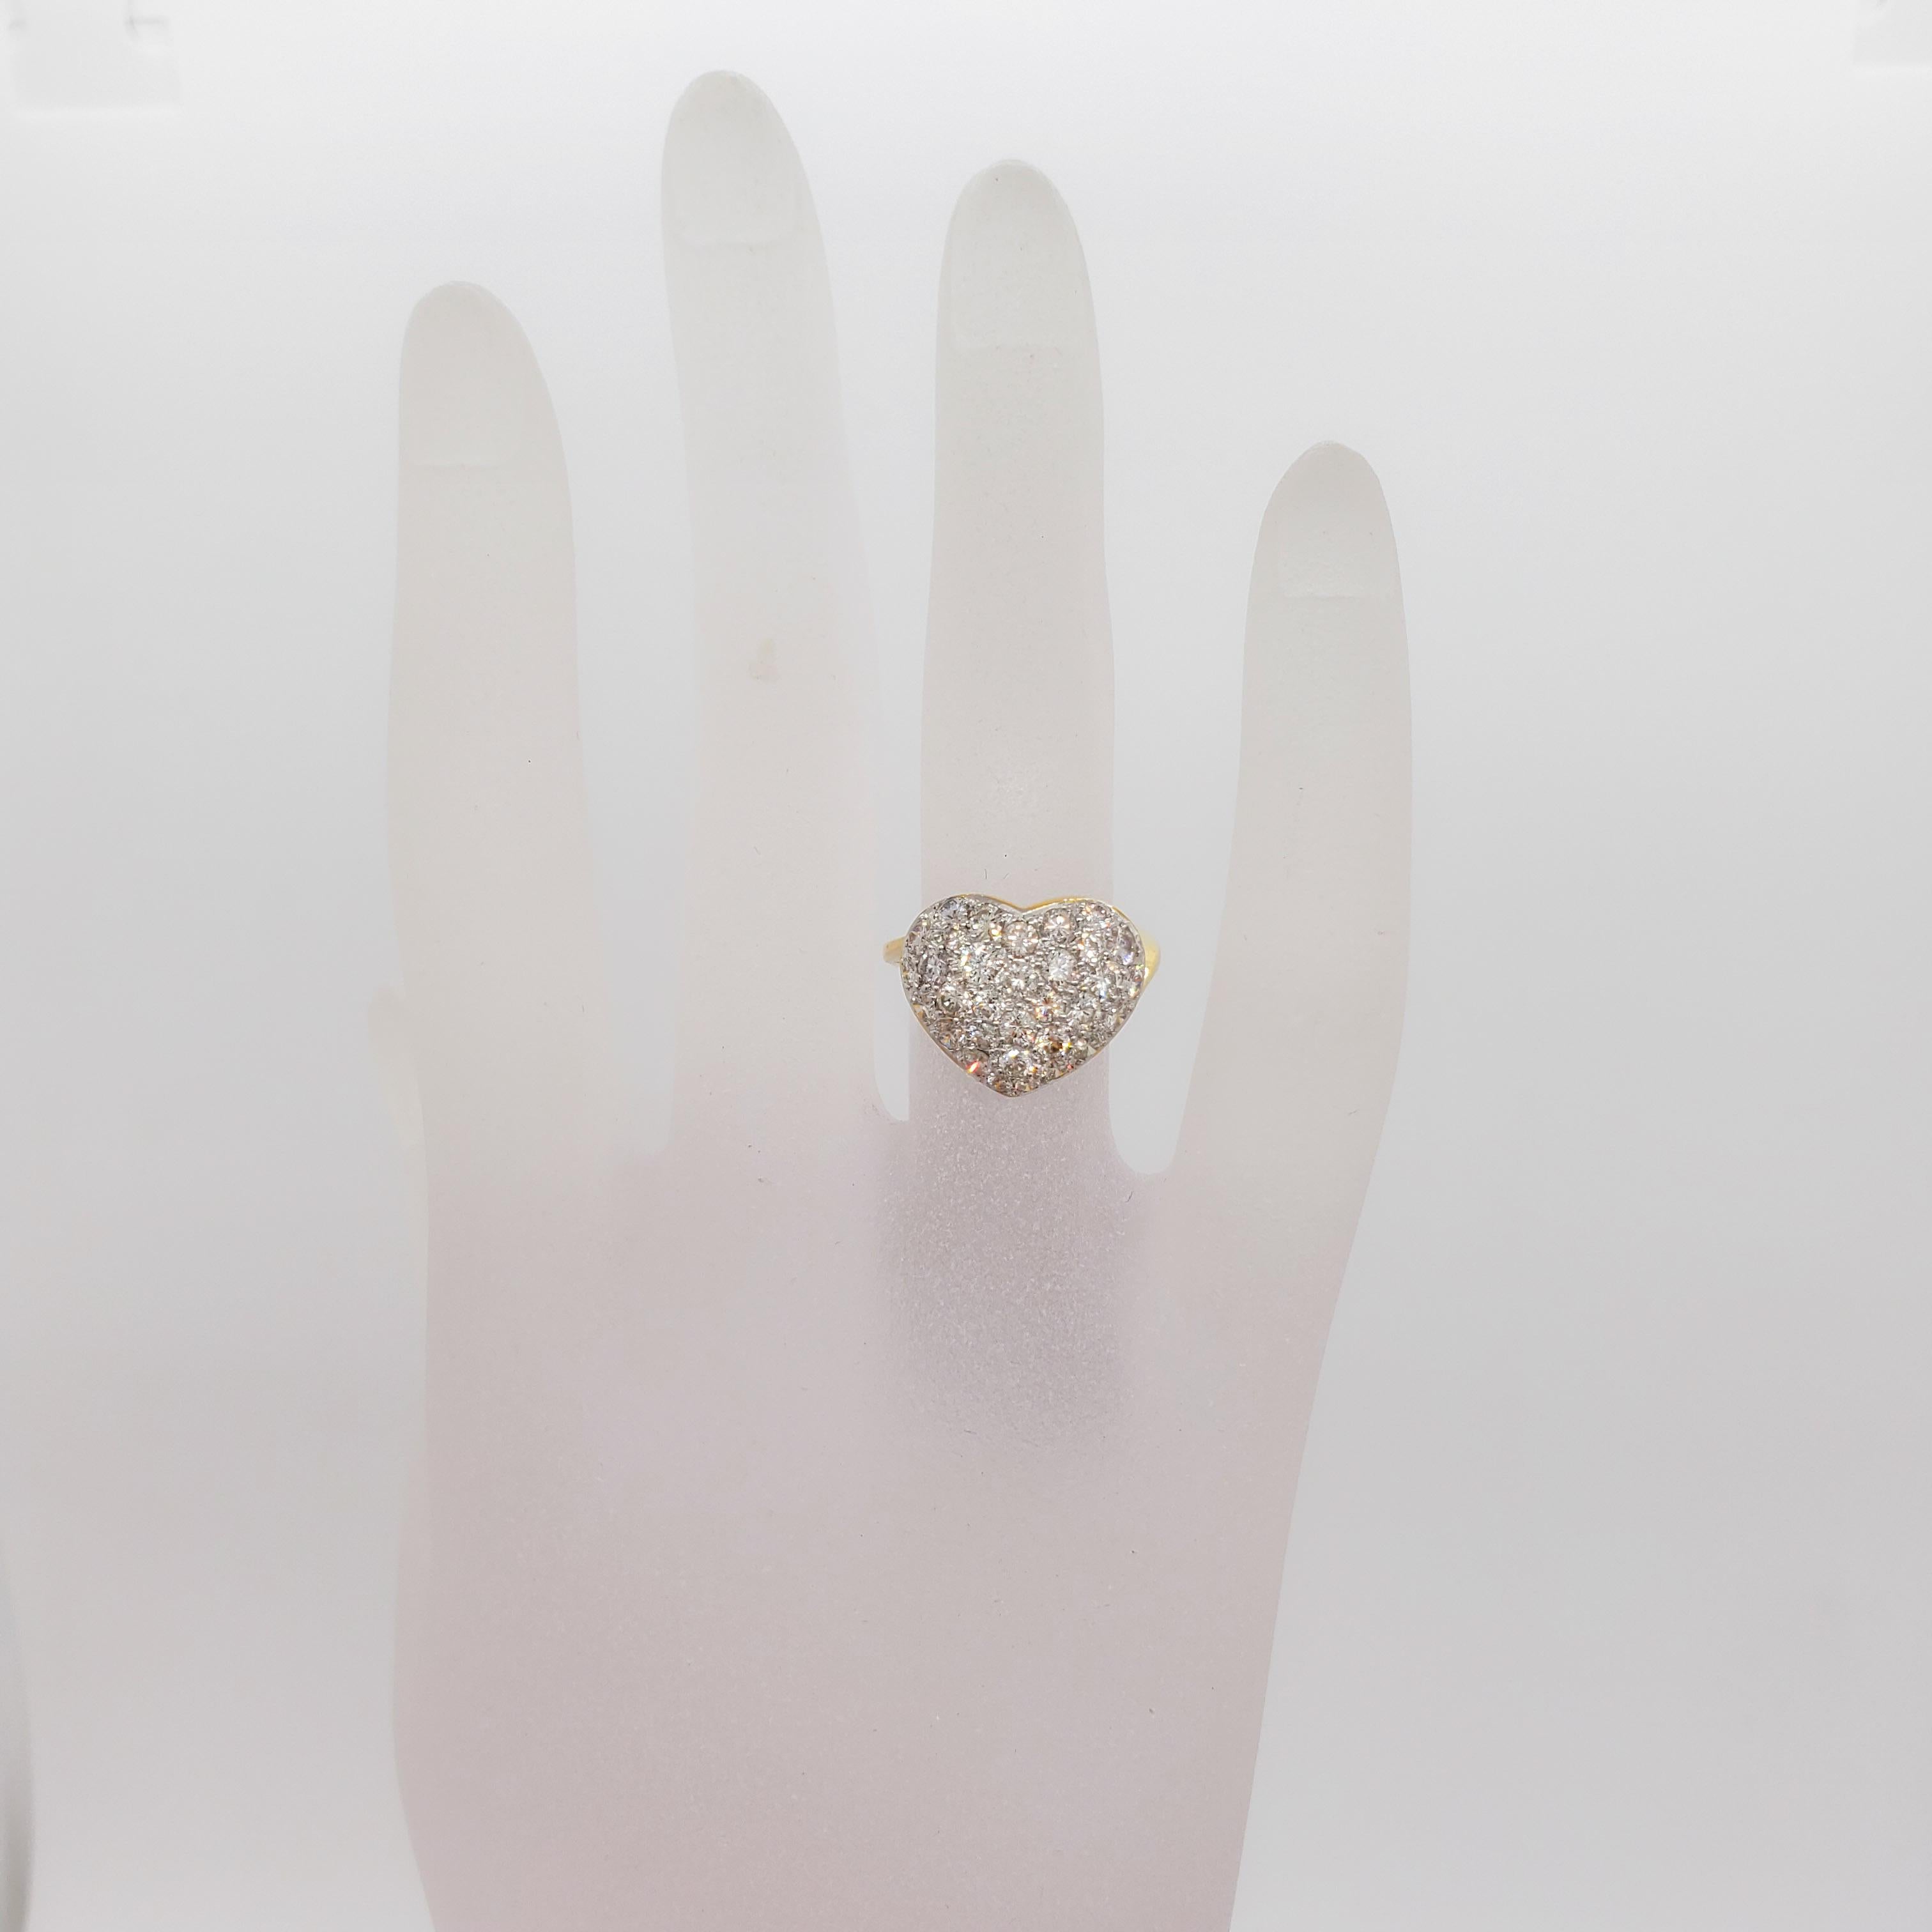 Beautiful estate ring with 1.70 ct. of good quality, white, and bright diamond rounds in a pave heart.  Handmade 18k yellow gold mounting in size 5.75.  Mint condition.